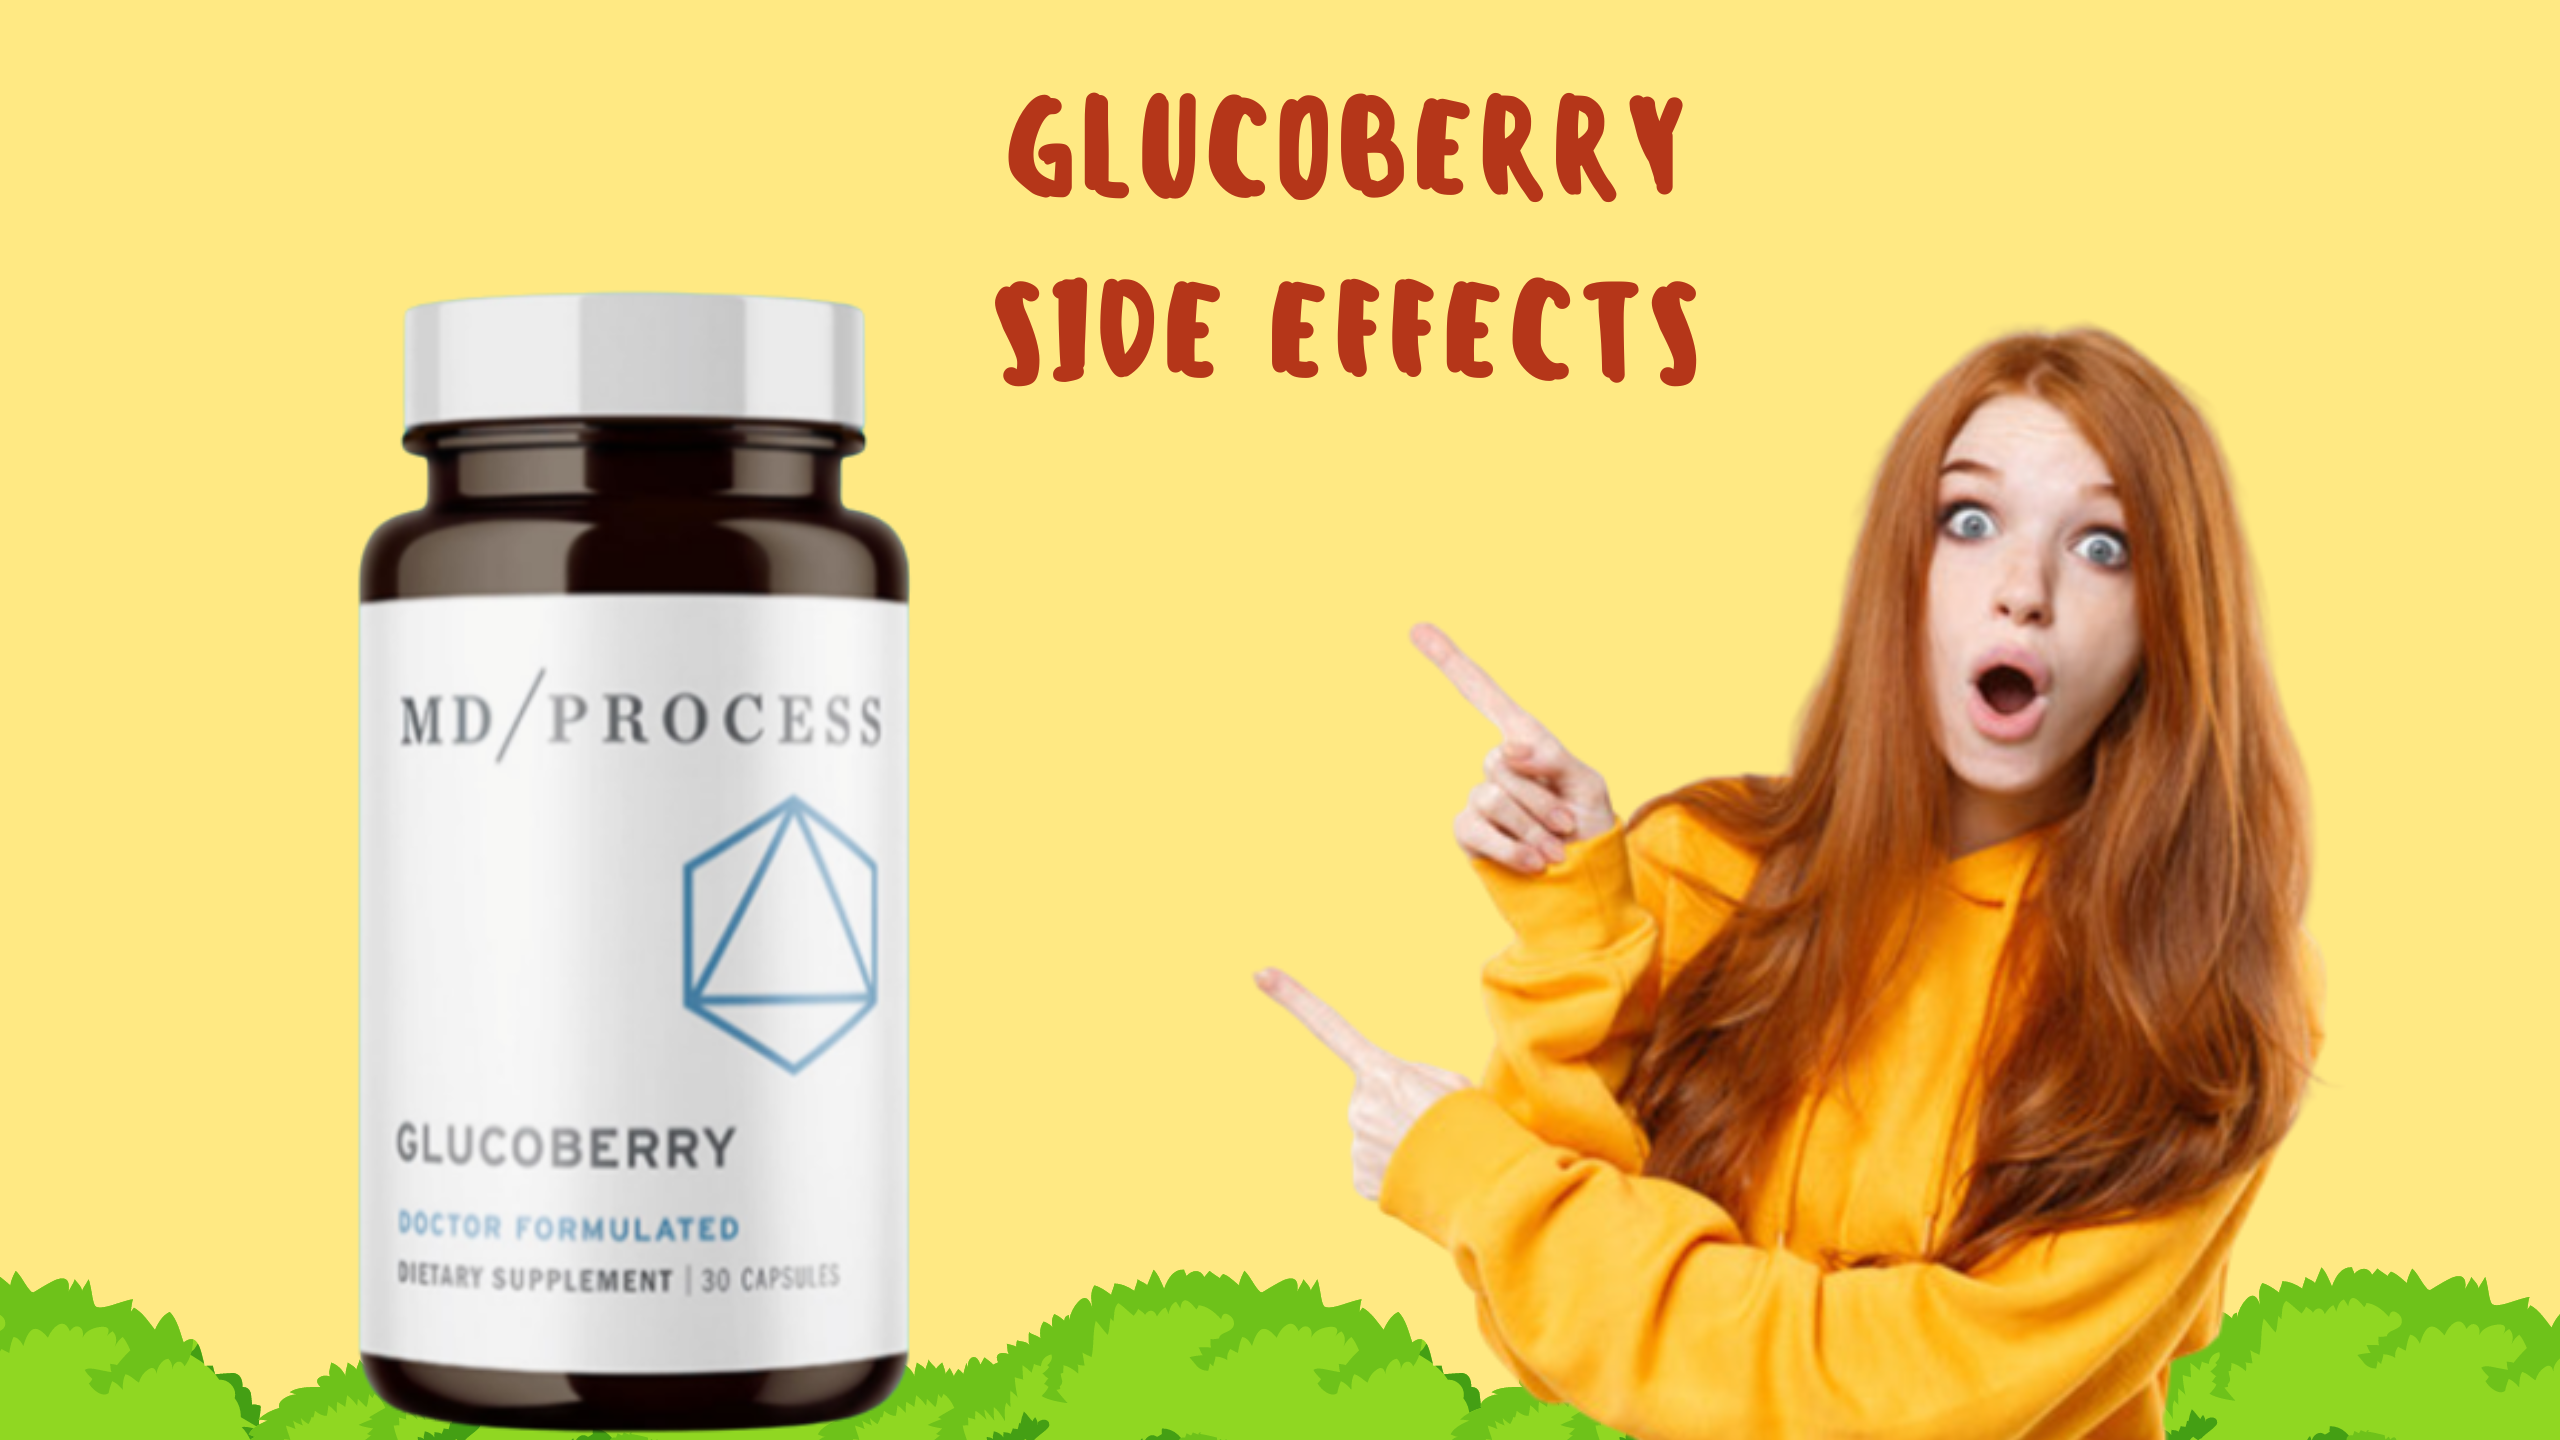 Are GlucoBerry Side Effects Putting Your Health at Risk?